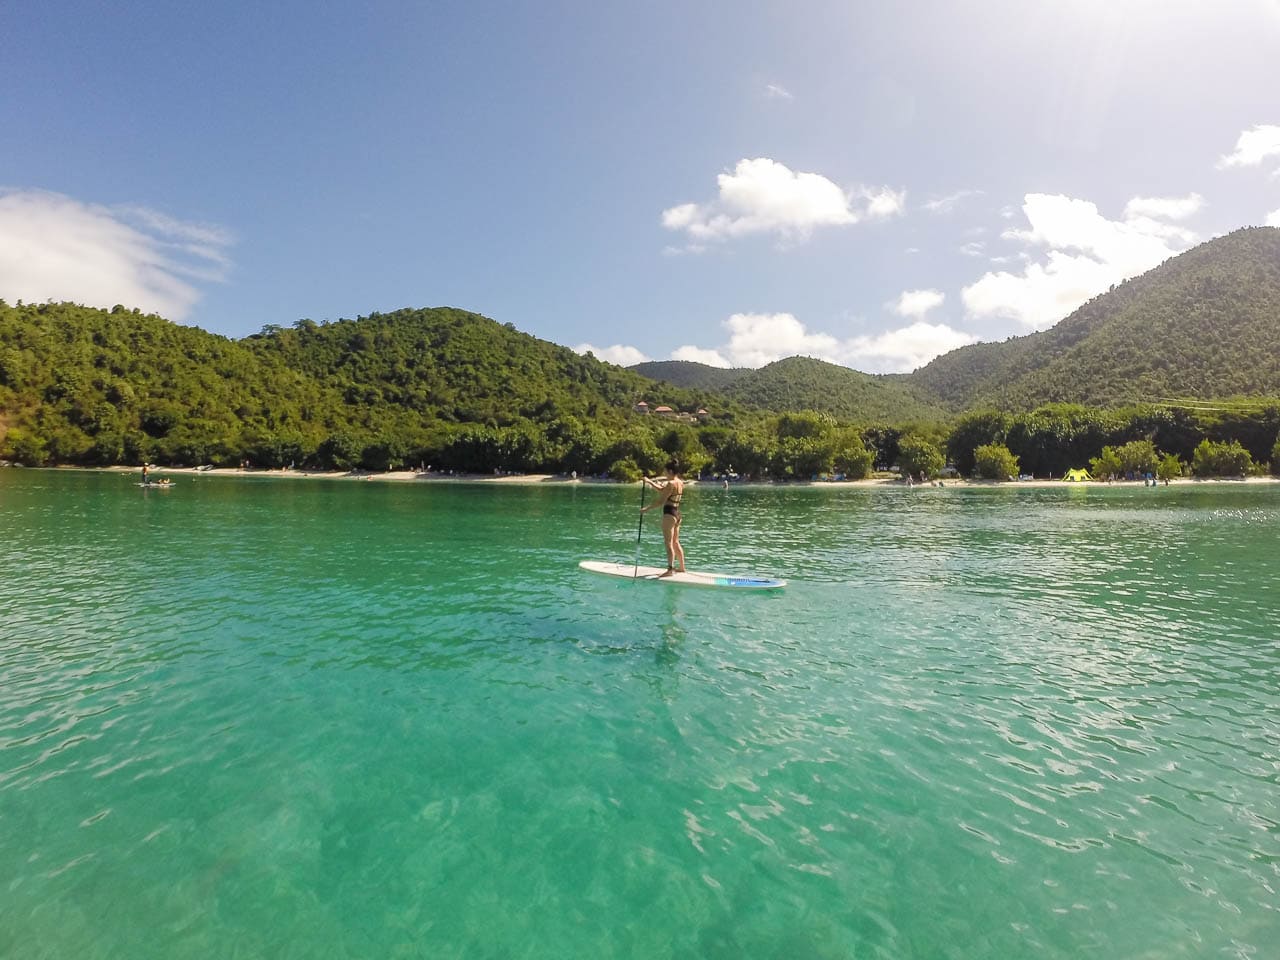 Stand-up Paddleboarding in Maho Bay, Virgin Islands National Park